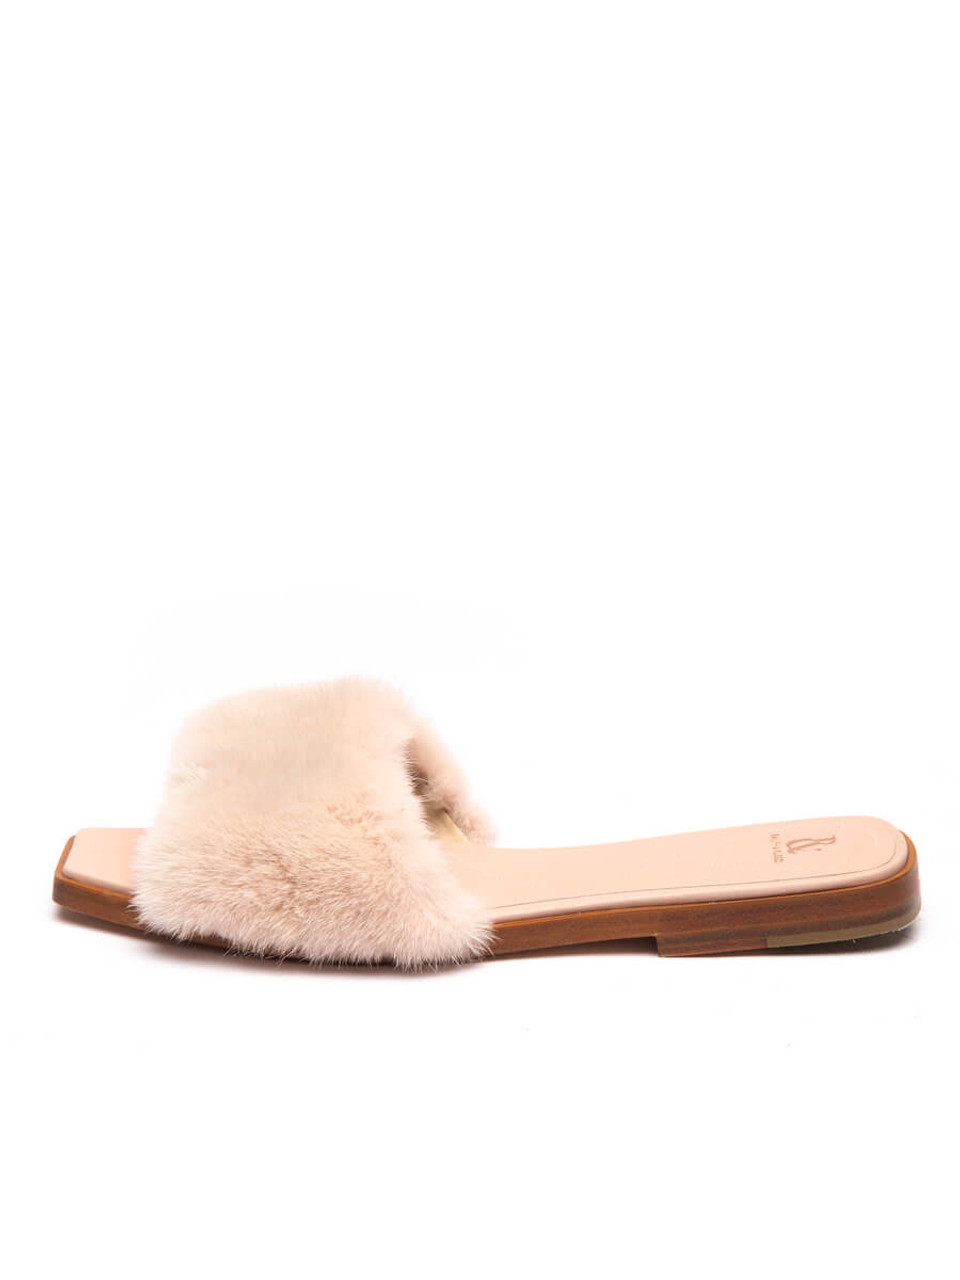 Used Ralph & Russo Fur Slides Beige Mink And Leather